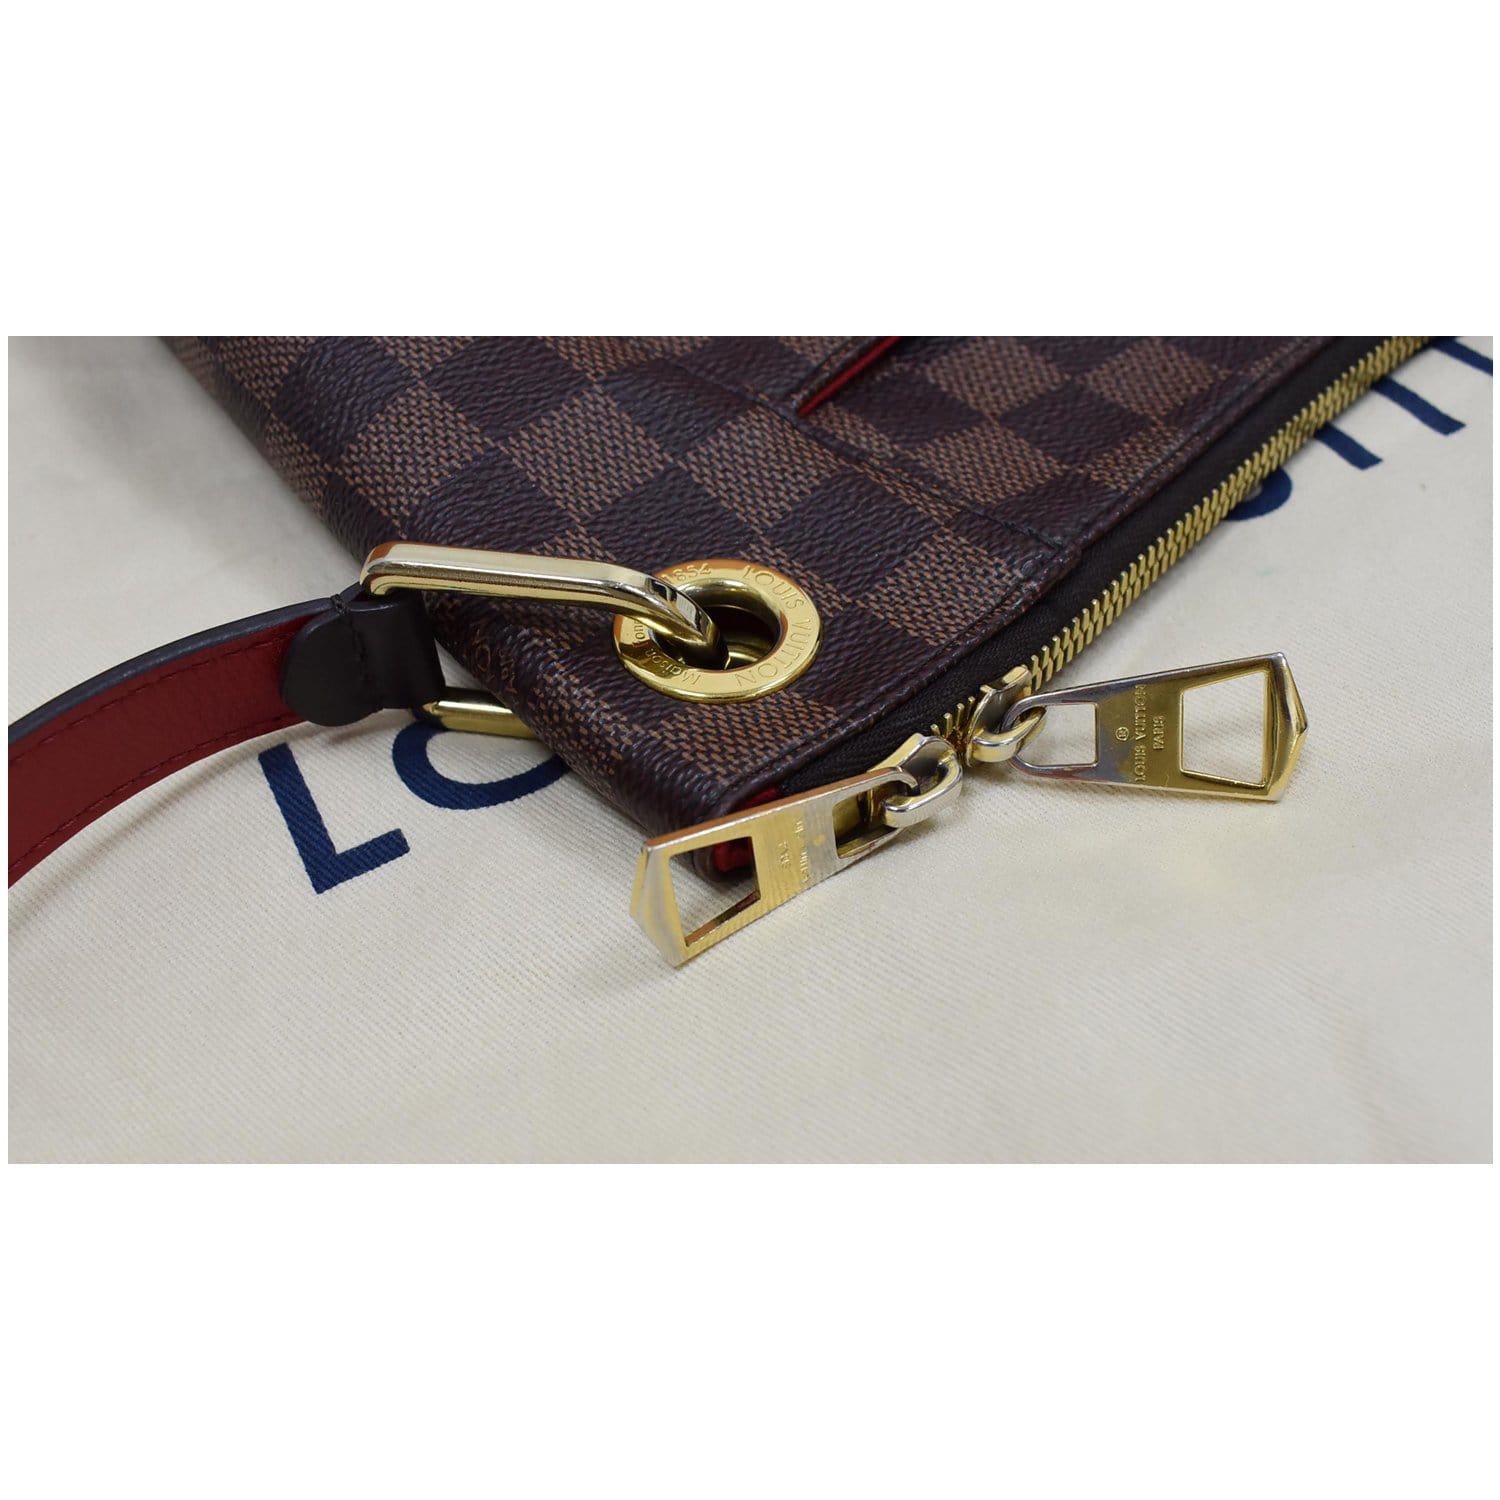 Louis Vuitton - South Bank Besace 9-Month Wear and Tear / Review 